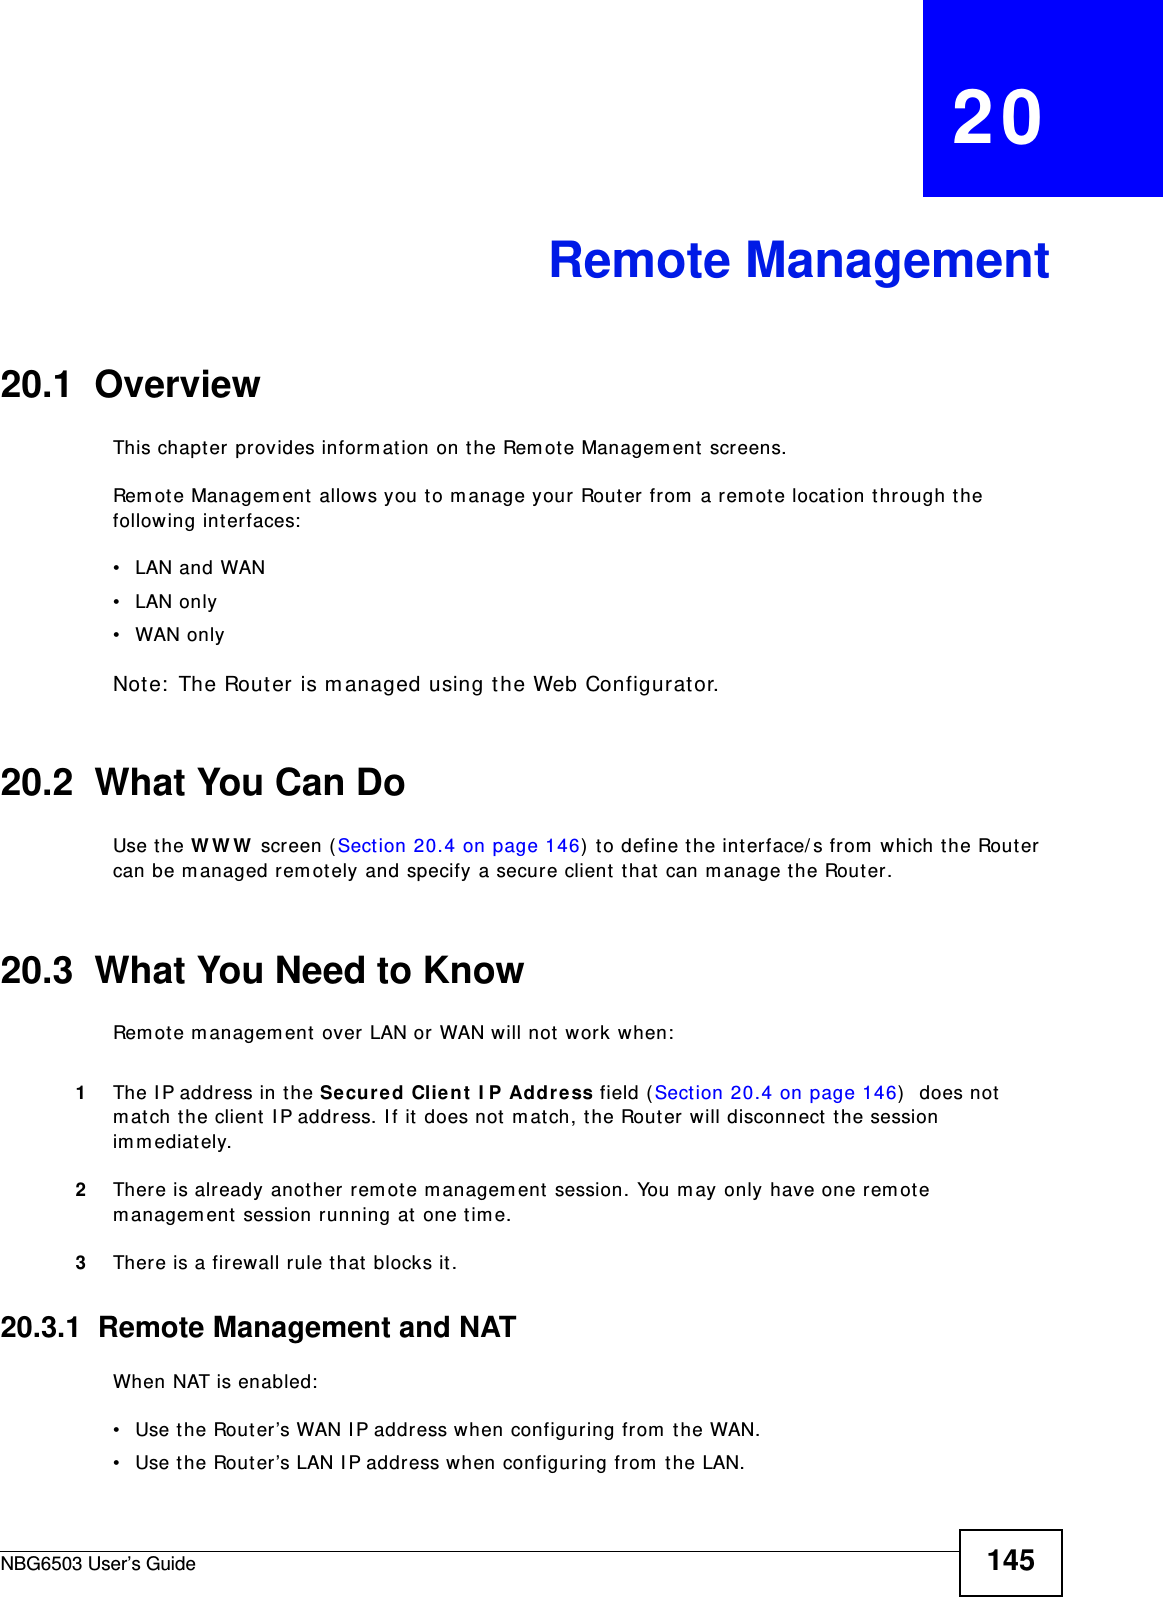 NBG6503 User’s Guide 145CHAPTER   20Remote Management20.1  OverviewThis chapter provides information on the Remote Management screens. Remote Management allows you to manage your Router from a remote location through the following interfaces:•LAN and WAN•LAN only•WAN onlyNote: The Router is managed using the Web Configurator.20.2  What You Can DoUse the WWW screen (Section 20.4 on page 146) to define the interface/s from which the Router can be managed remotely and specify a secure client that can manage the Router.20.3  What You Need to KnowRemote management over LAN or WAN will not work when:1The IP address in the Secured Client IP Address field (Section 20.4 on page 146)  does not match the client IP address. If it does not match, the Router will disconnect the session immediately.2There is already another remote management session. You may only have one remote management session running at one time.3There is a firewall rule that blocks it.20.3.1  Remote Management and NATWhen NAT is enabled:• Use the Router’s WAN IP address when configuring from the WAN. • Use the Router’s LAN IP address when configuring from the LAN.